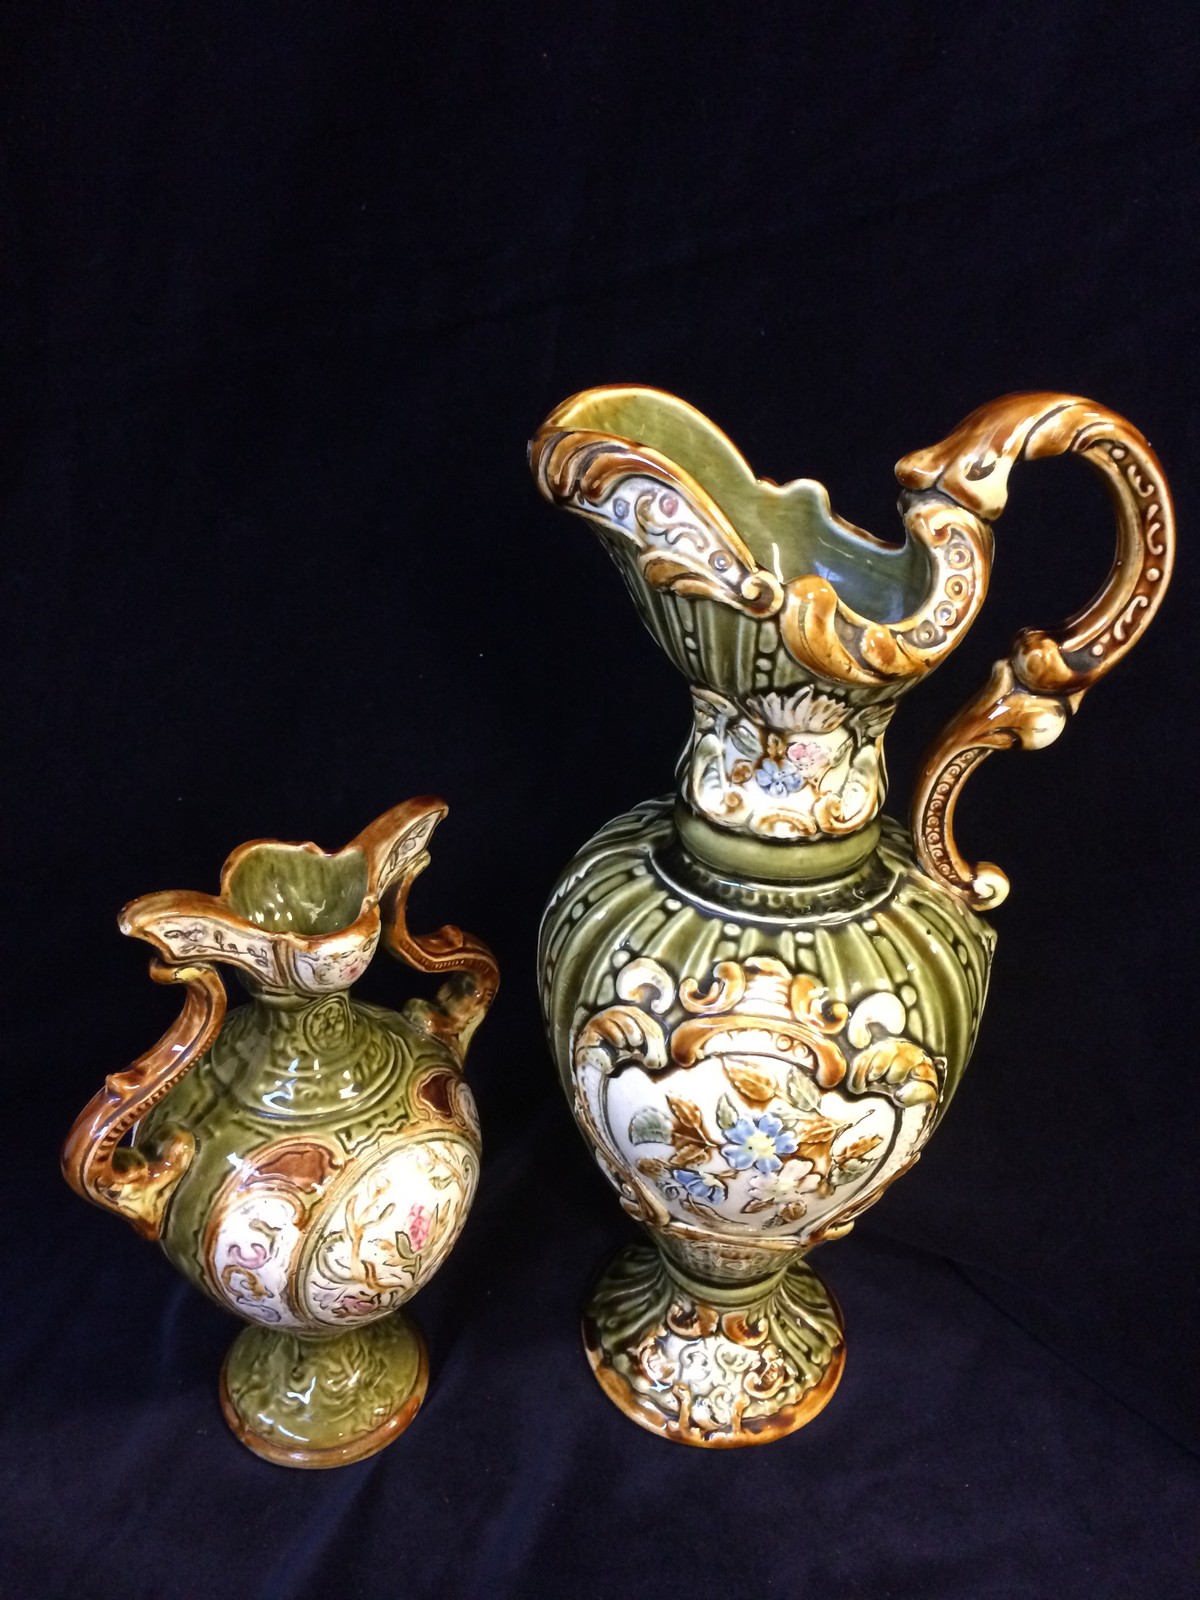 Two majolica vases by Alhambrian